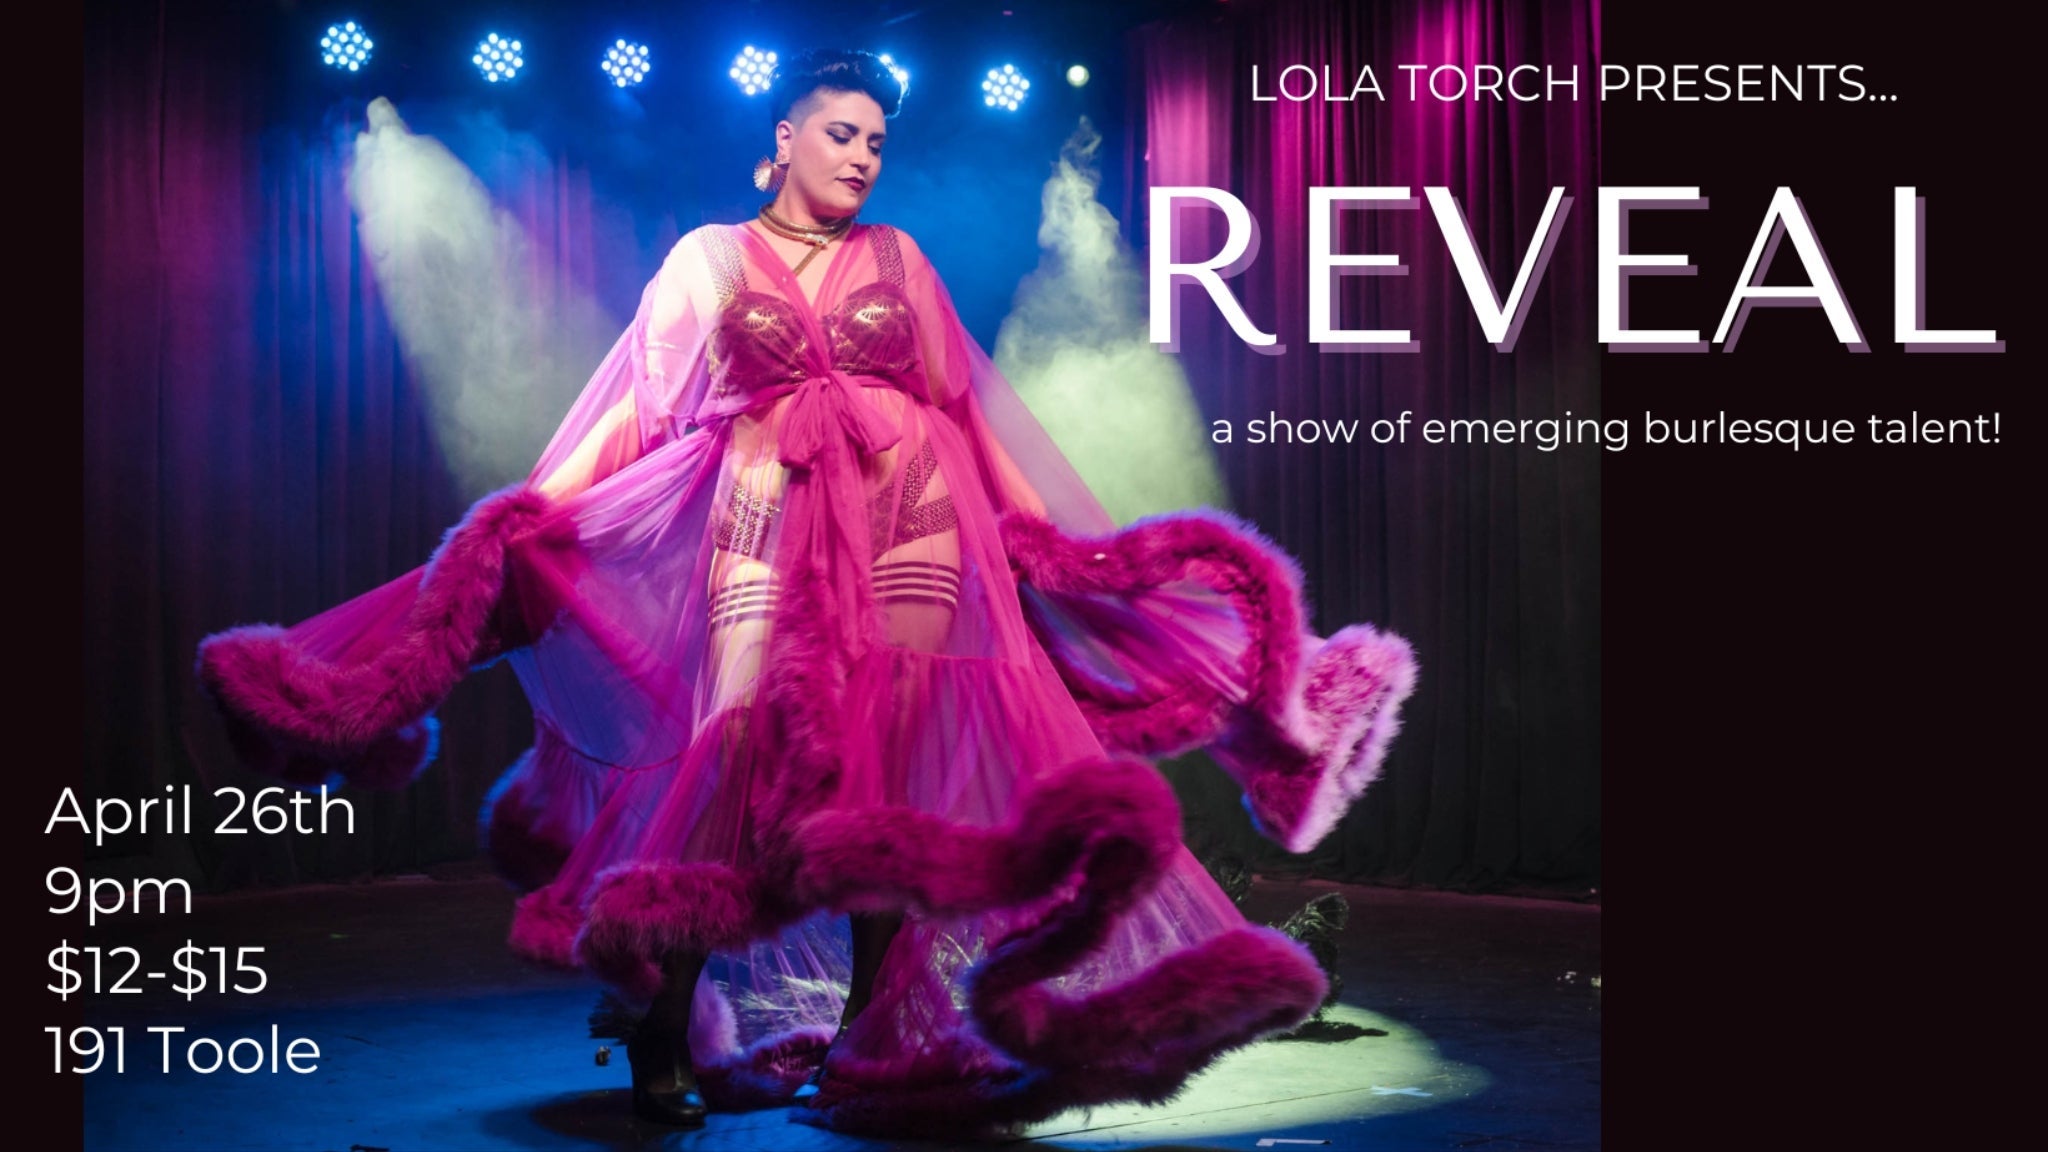 REVEAL: A Show of Emerging Burlesque Talent @ 191 Toole